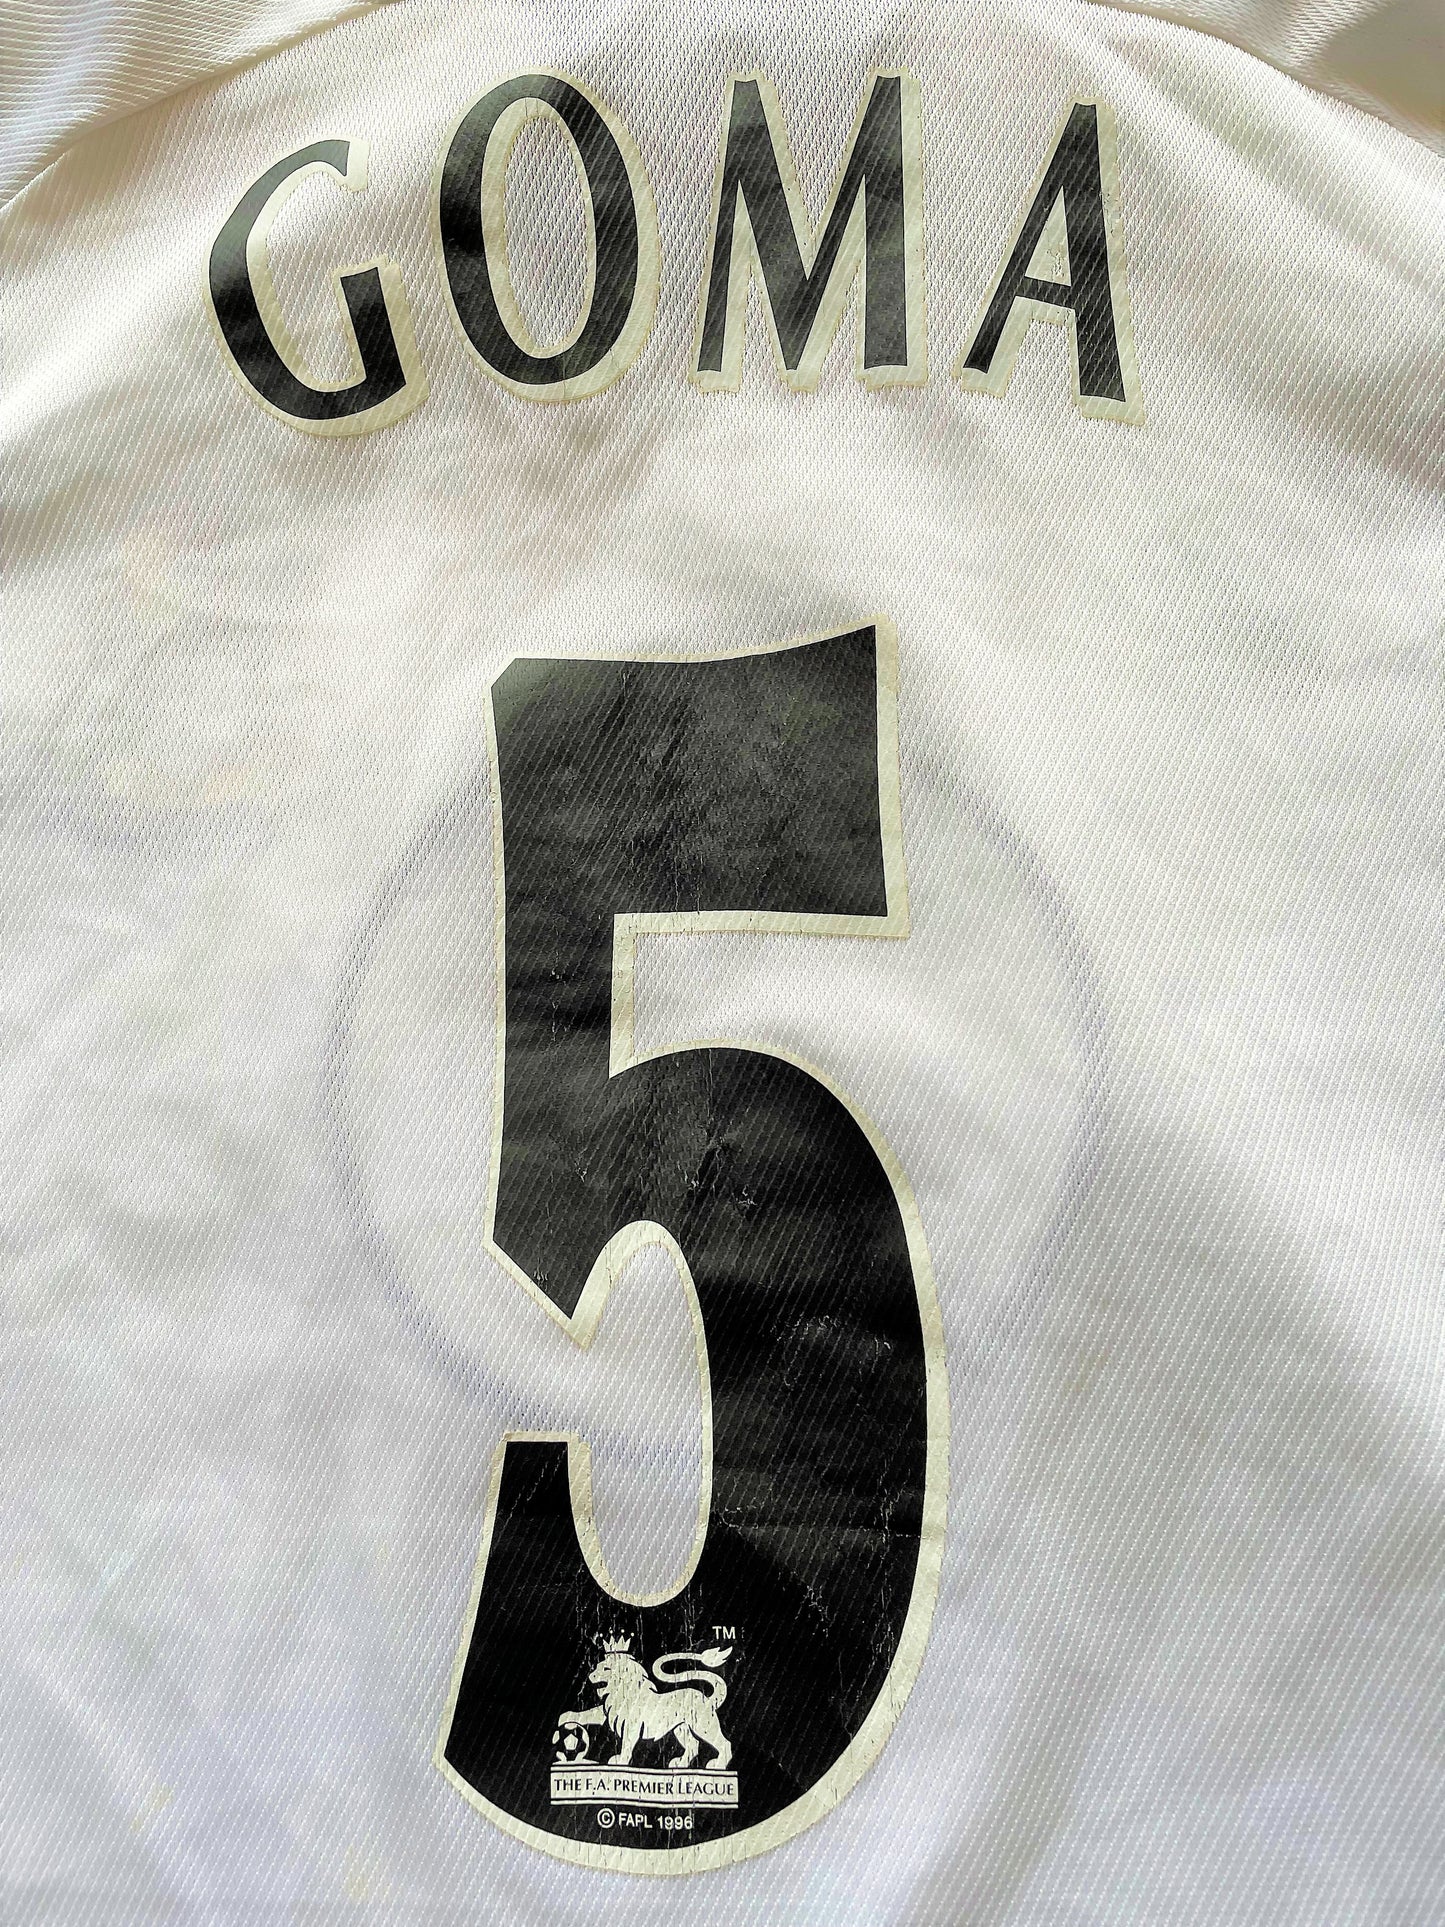 Newcastle 1999 Away Shirt GOMA 5 (very good) Adults XS/YXL 164. Height 19.5 inches